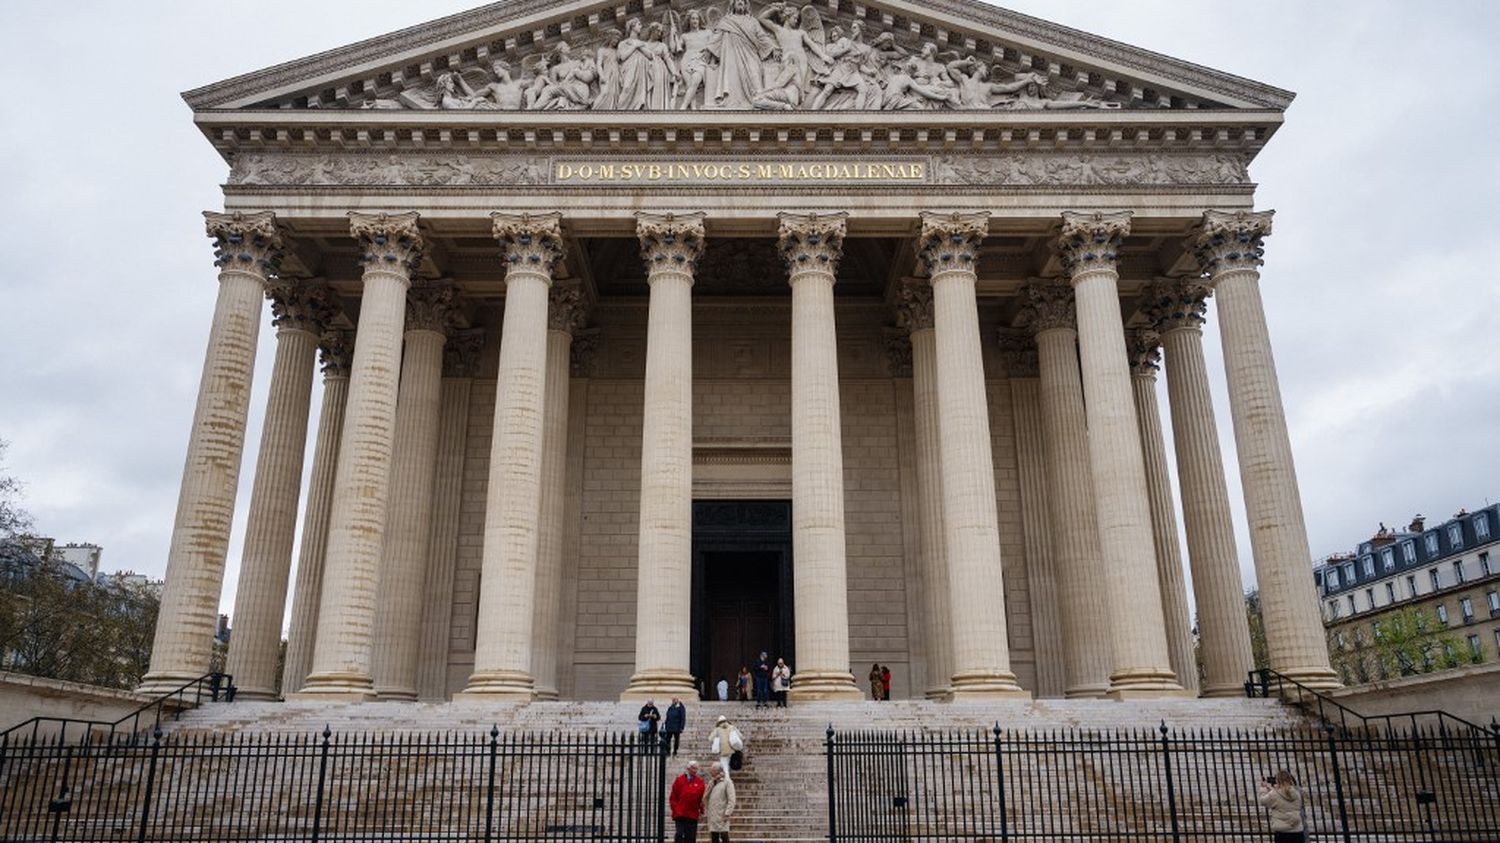 Paris 2024: The Madeleine Church unveils its renovated facade as the Olympics approach